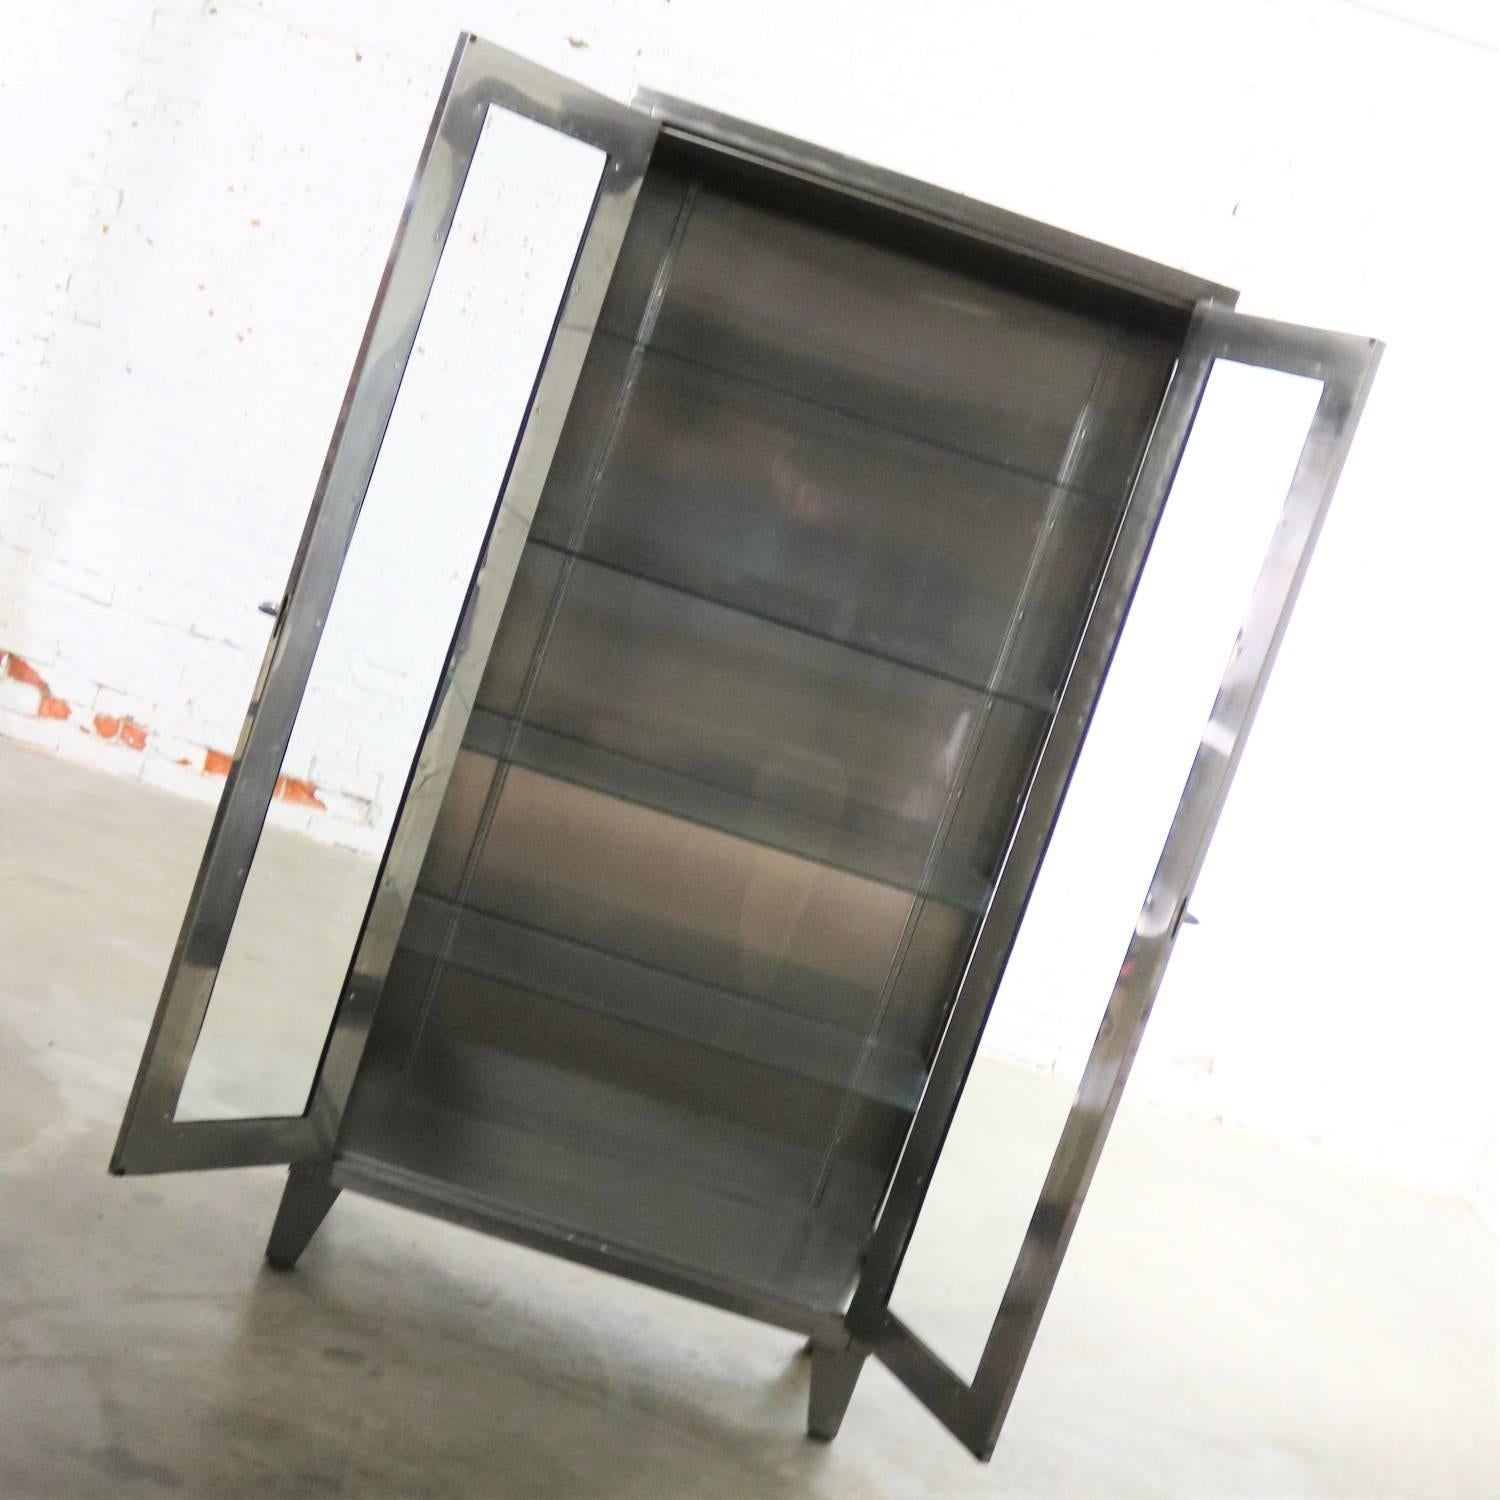 Vintage Stainless Steel Industrial Display Apothecary Medical Cabinet Glass Door 1